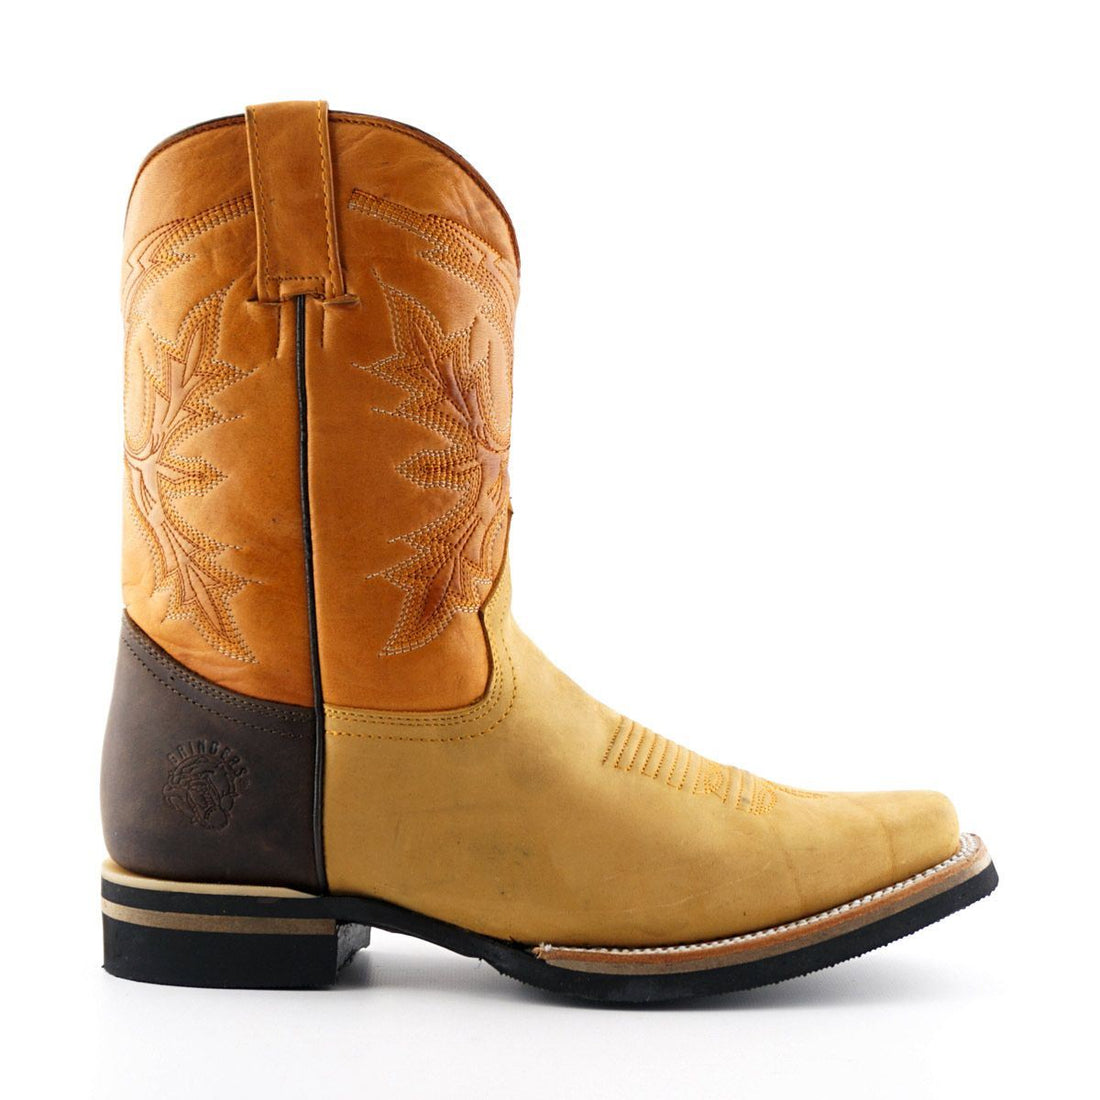 Grinders Tan Mid-Calf Cowboy Leather Boots- El Paso - Upperclass Fashions 